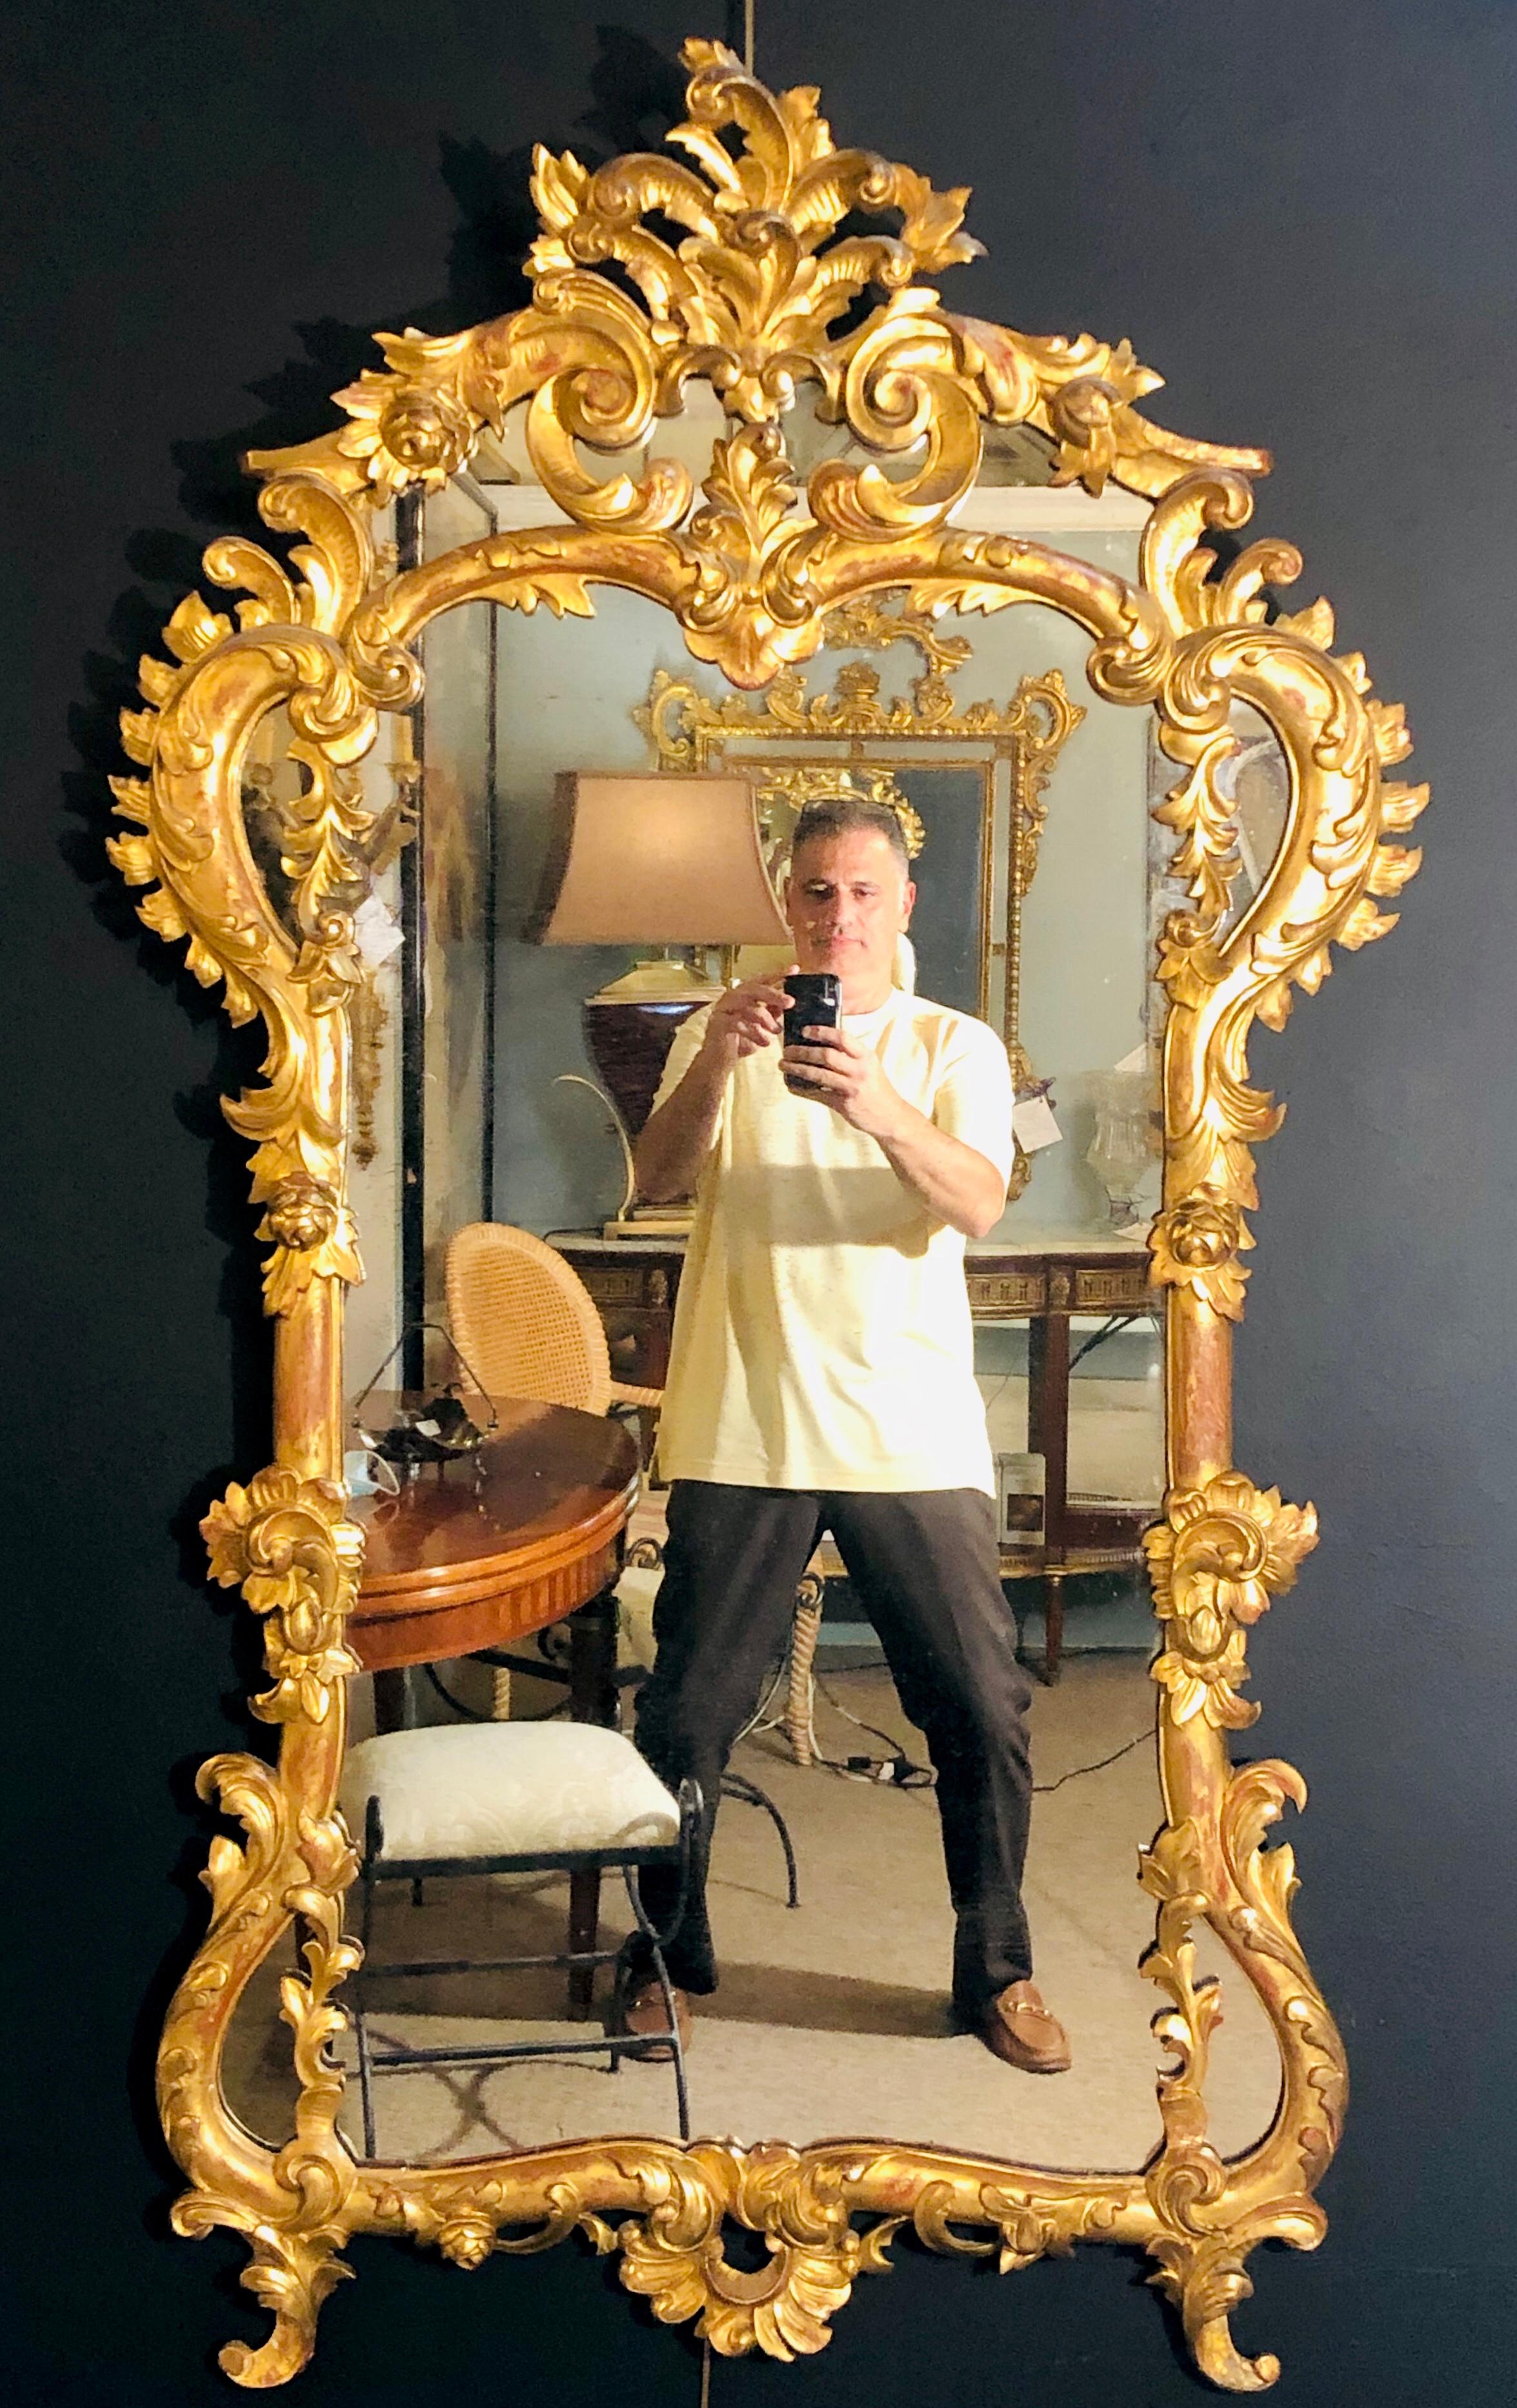 19th century gilt mirror wall or console mirror. A stunning wall or console mirror having a spectacular gilt gold wooden frame with carved roses, leafs and vine showing a clear center mirror set within a pierced carved border. One of the finest